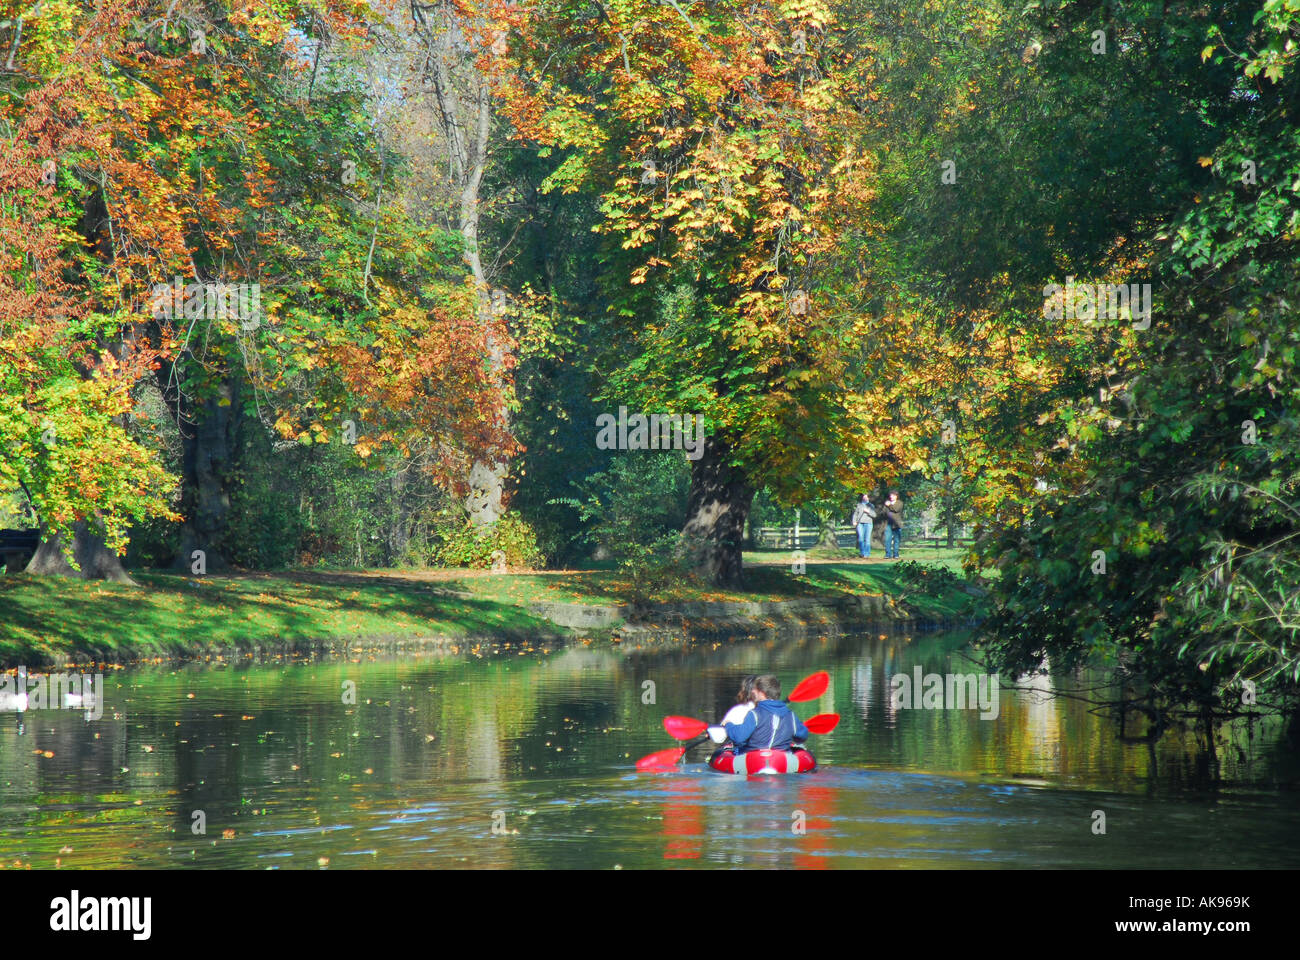 OXFORD, UK. Canoeing on the River Cherwell in Christ Church Meadow. Stock Photo